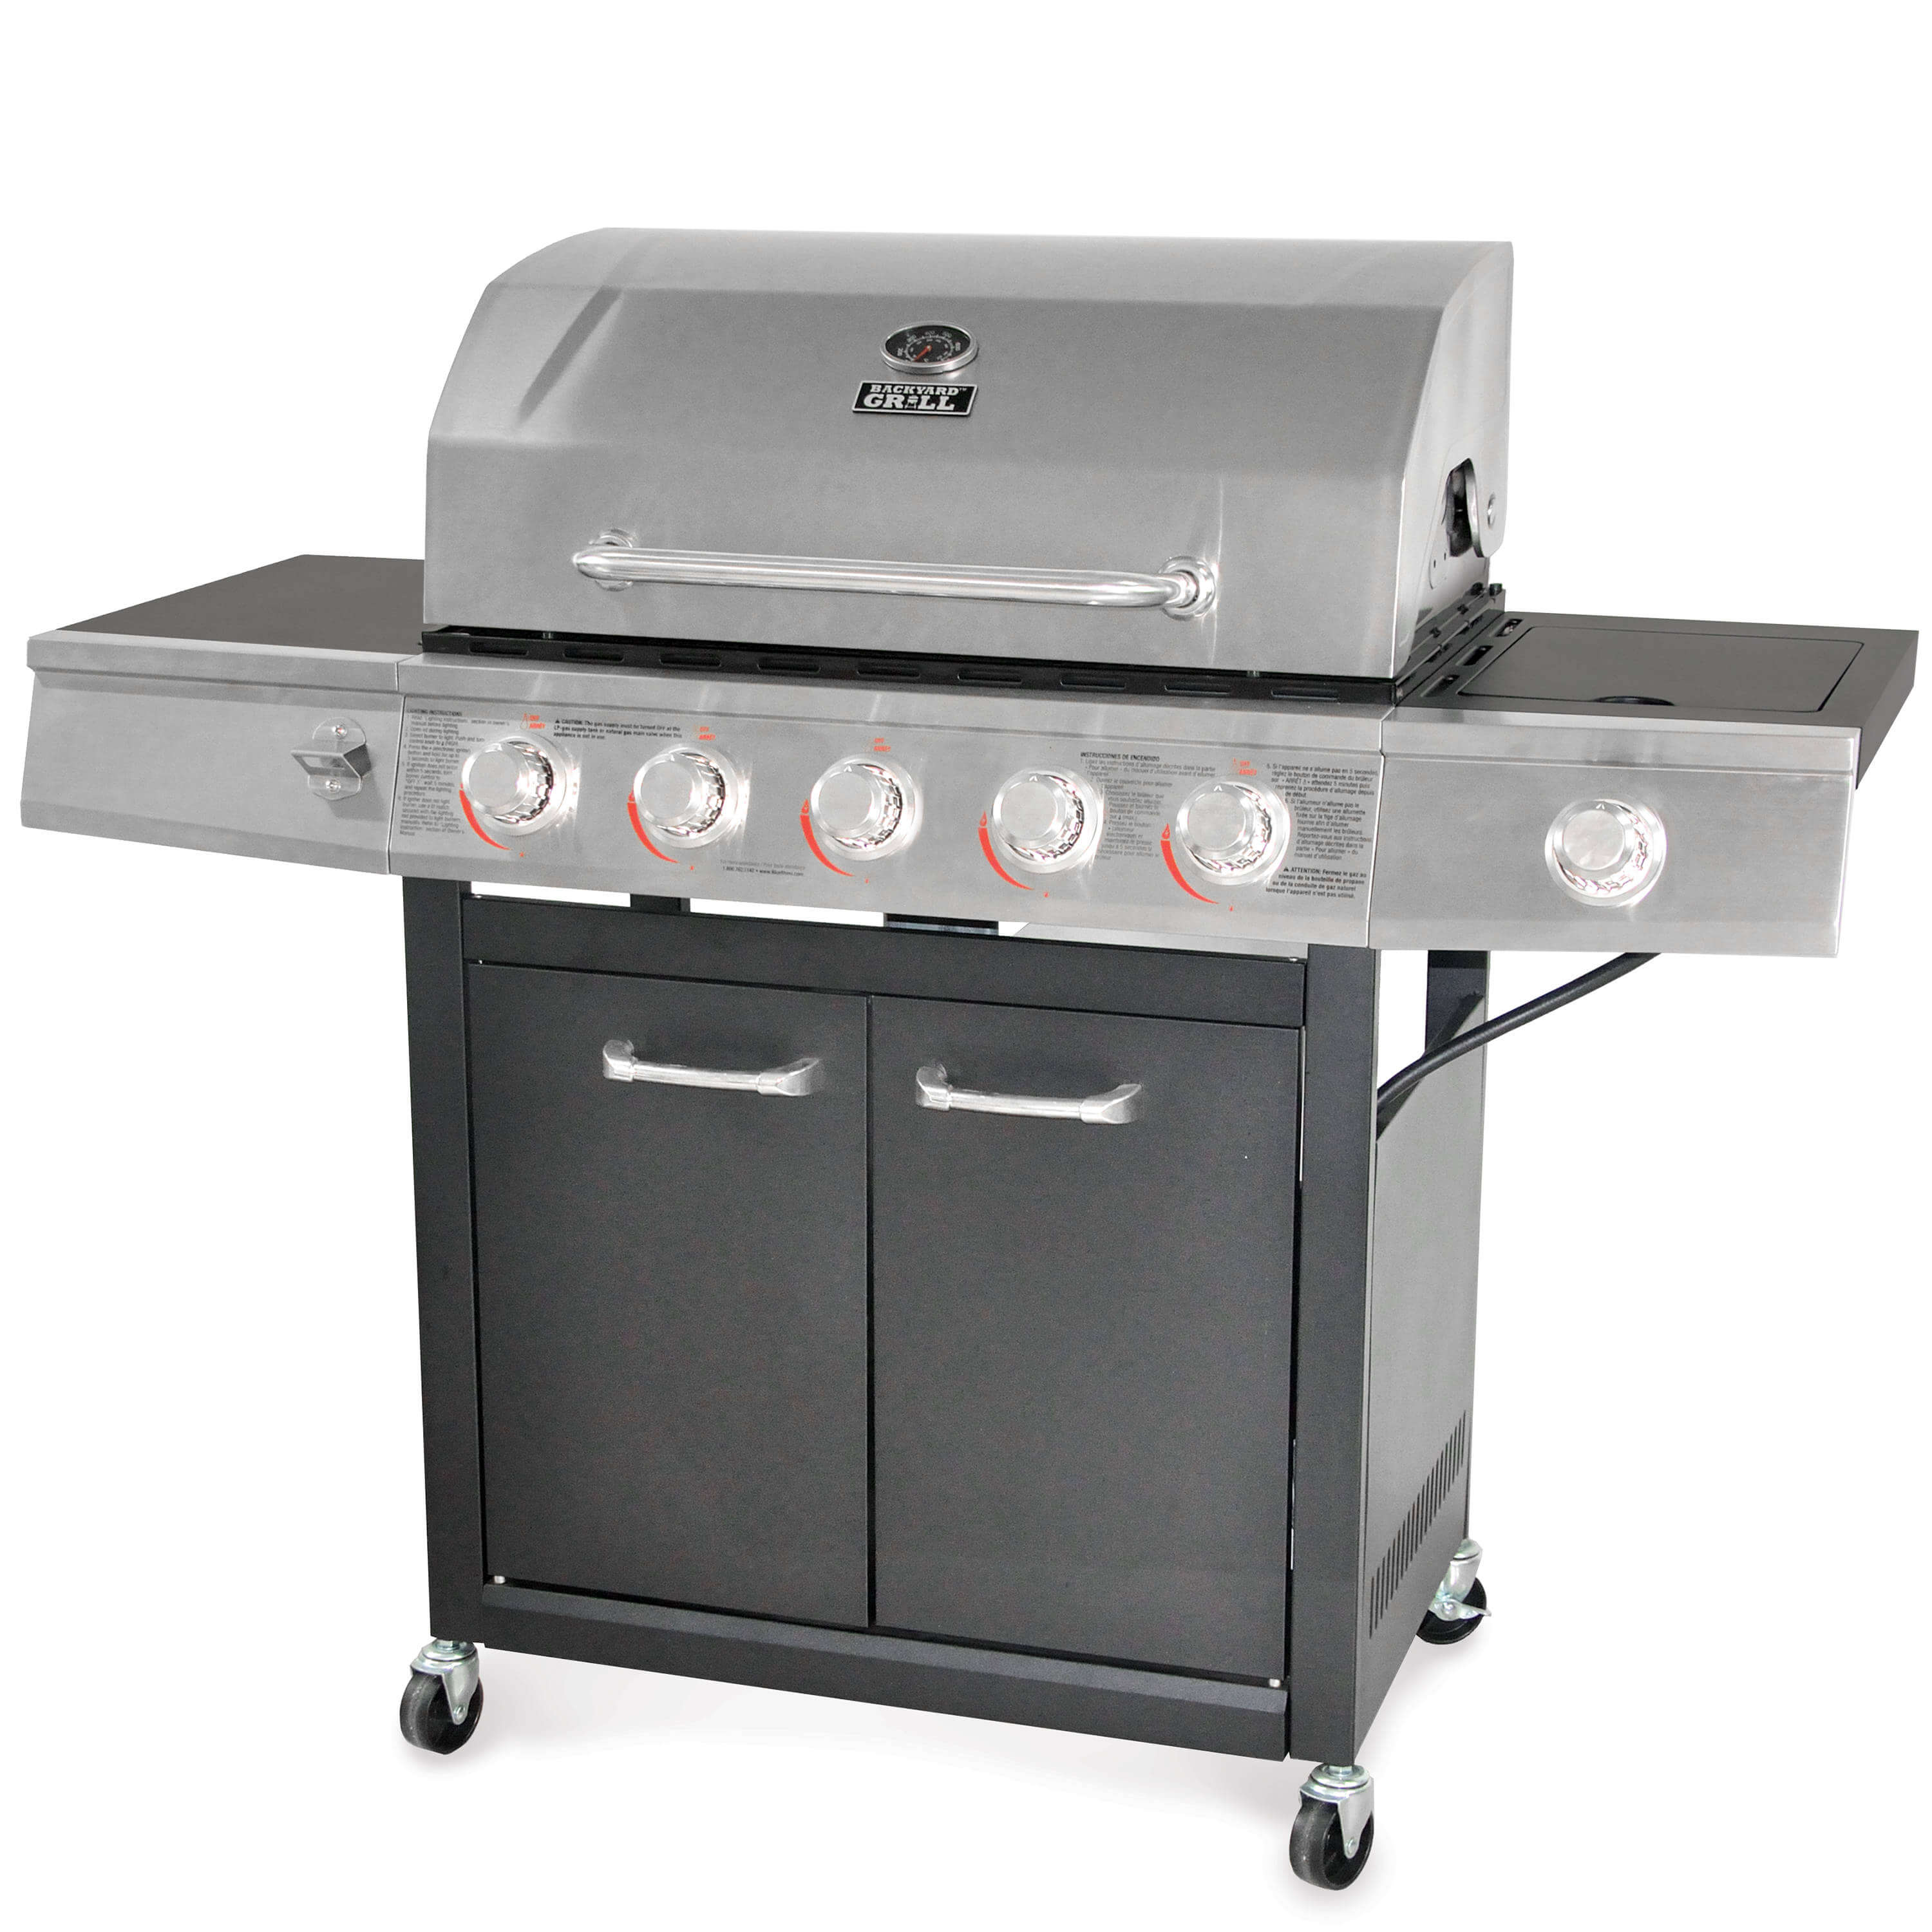 Outdoor Backyard Grill with Stainless Steel Head and Black Cabinet Doors. Grill has 5 Main Control Knobs and 1 Side Burner Knob.